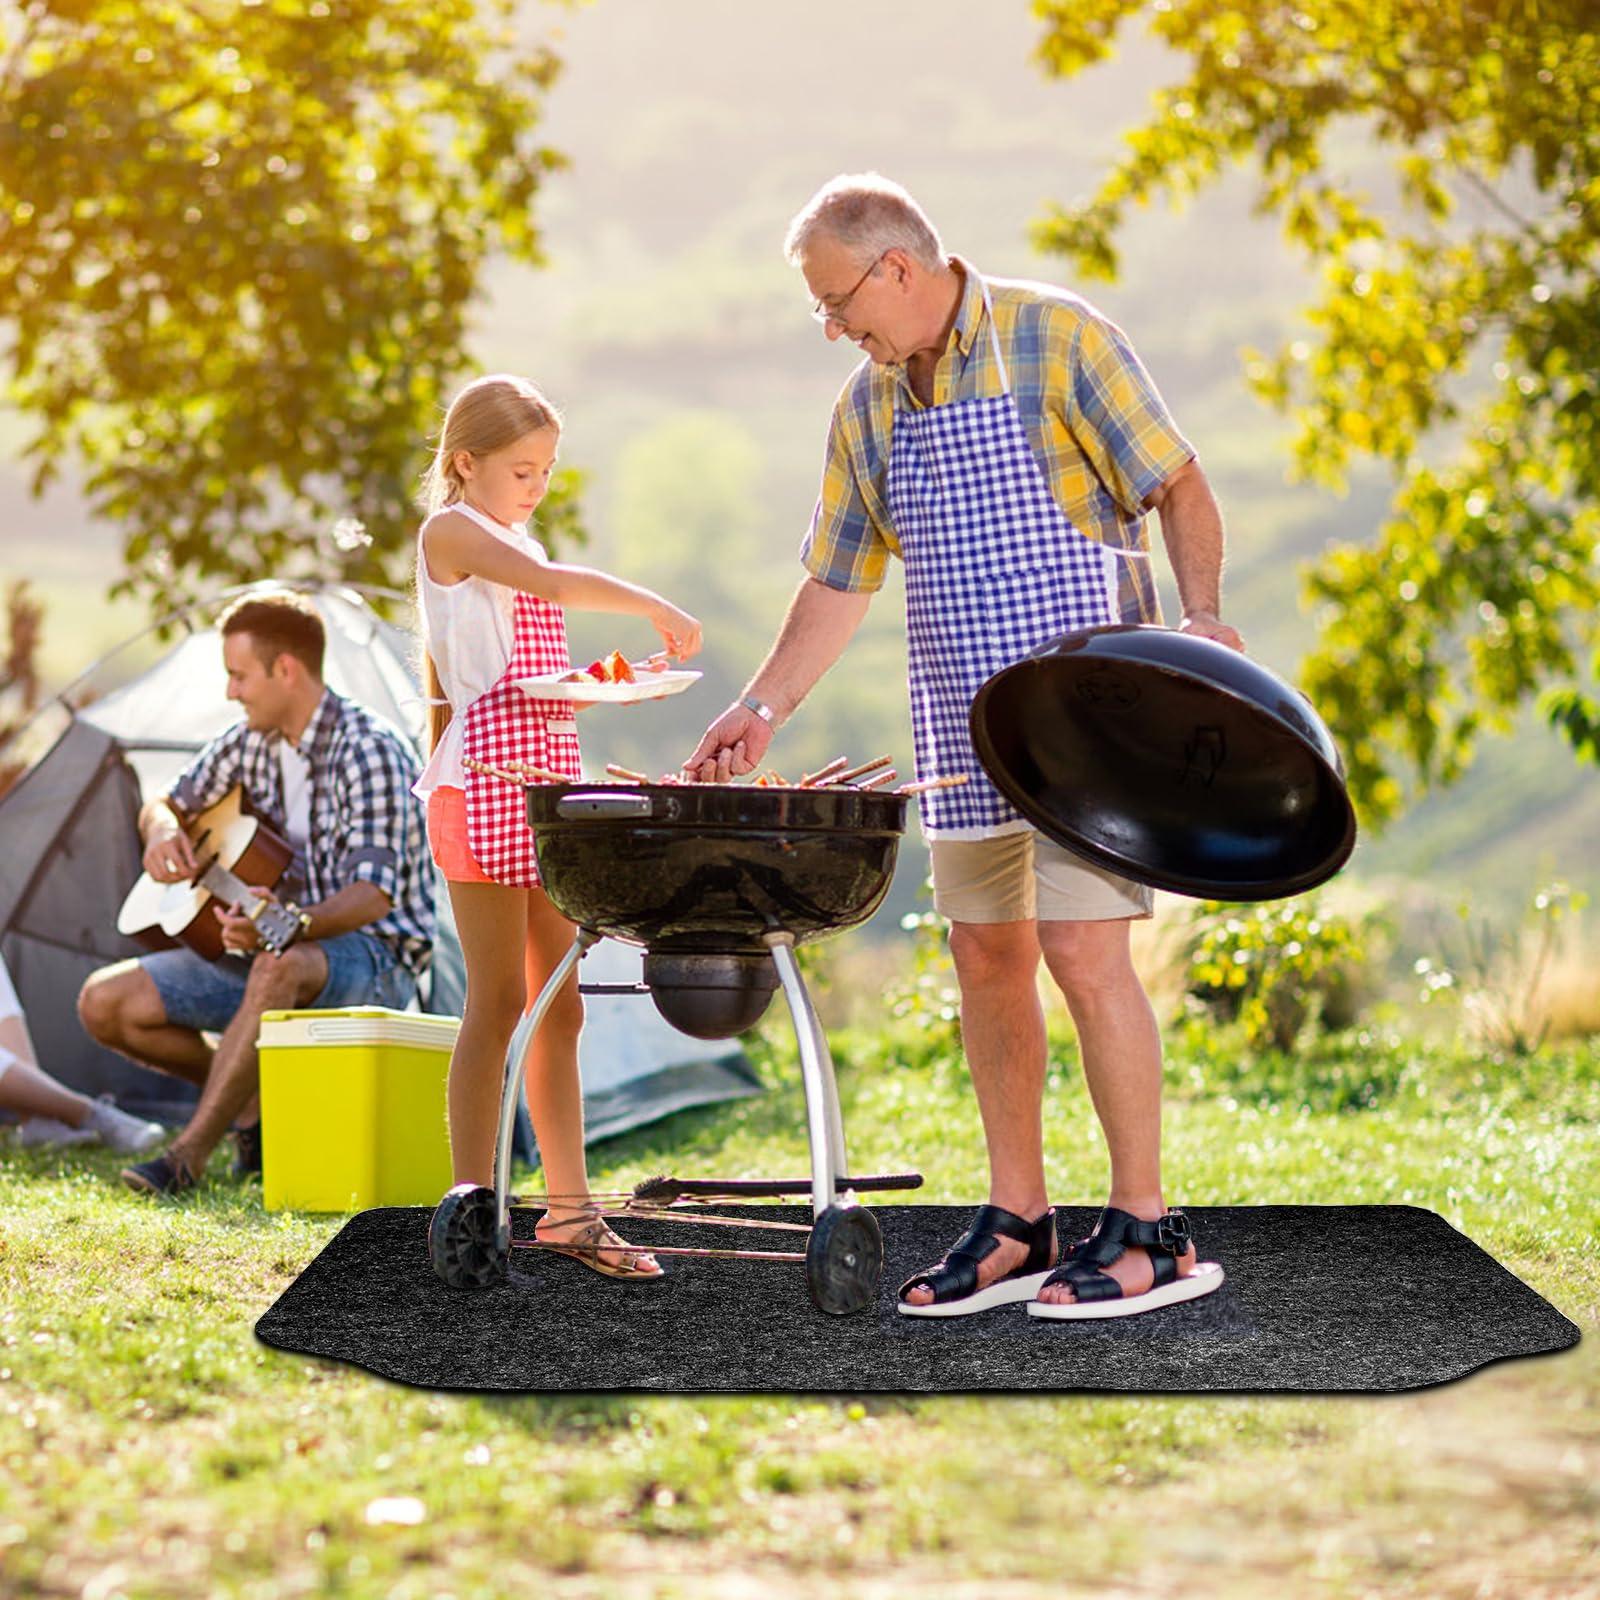 Fasmov 36 x 50 inches Under The Grill Protective Deck and Patio Mat, Under Grill Floor Mats to Protect Deck, BBQ Mat for Under BBQ, Absorbent Oil Pad Protector for Deck & Patio - CookCave